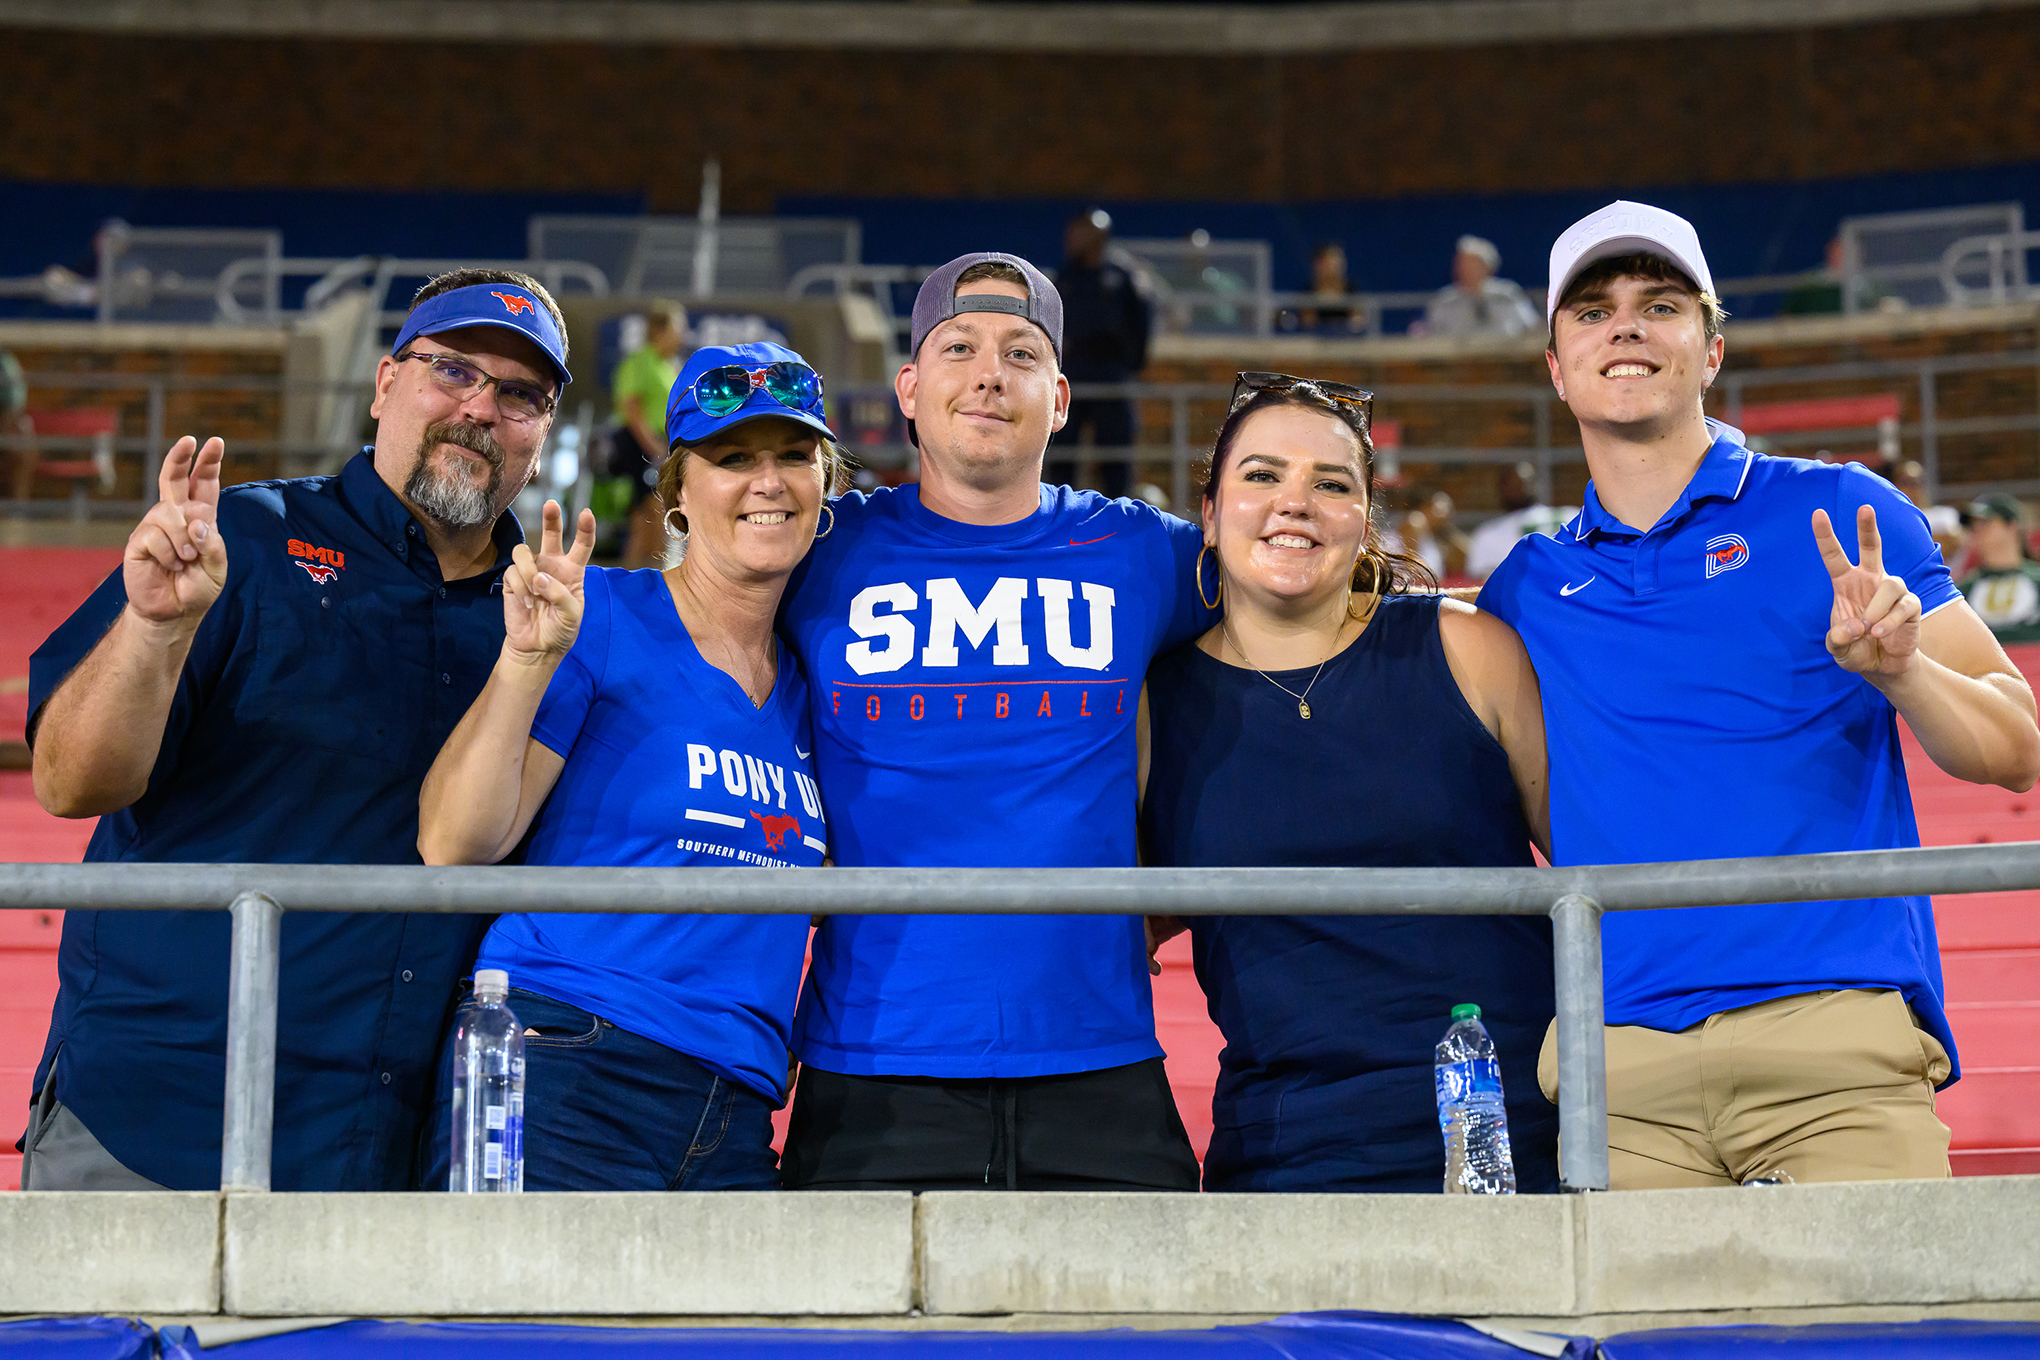  SMU students and family members in the stands during football game